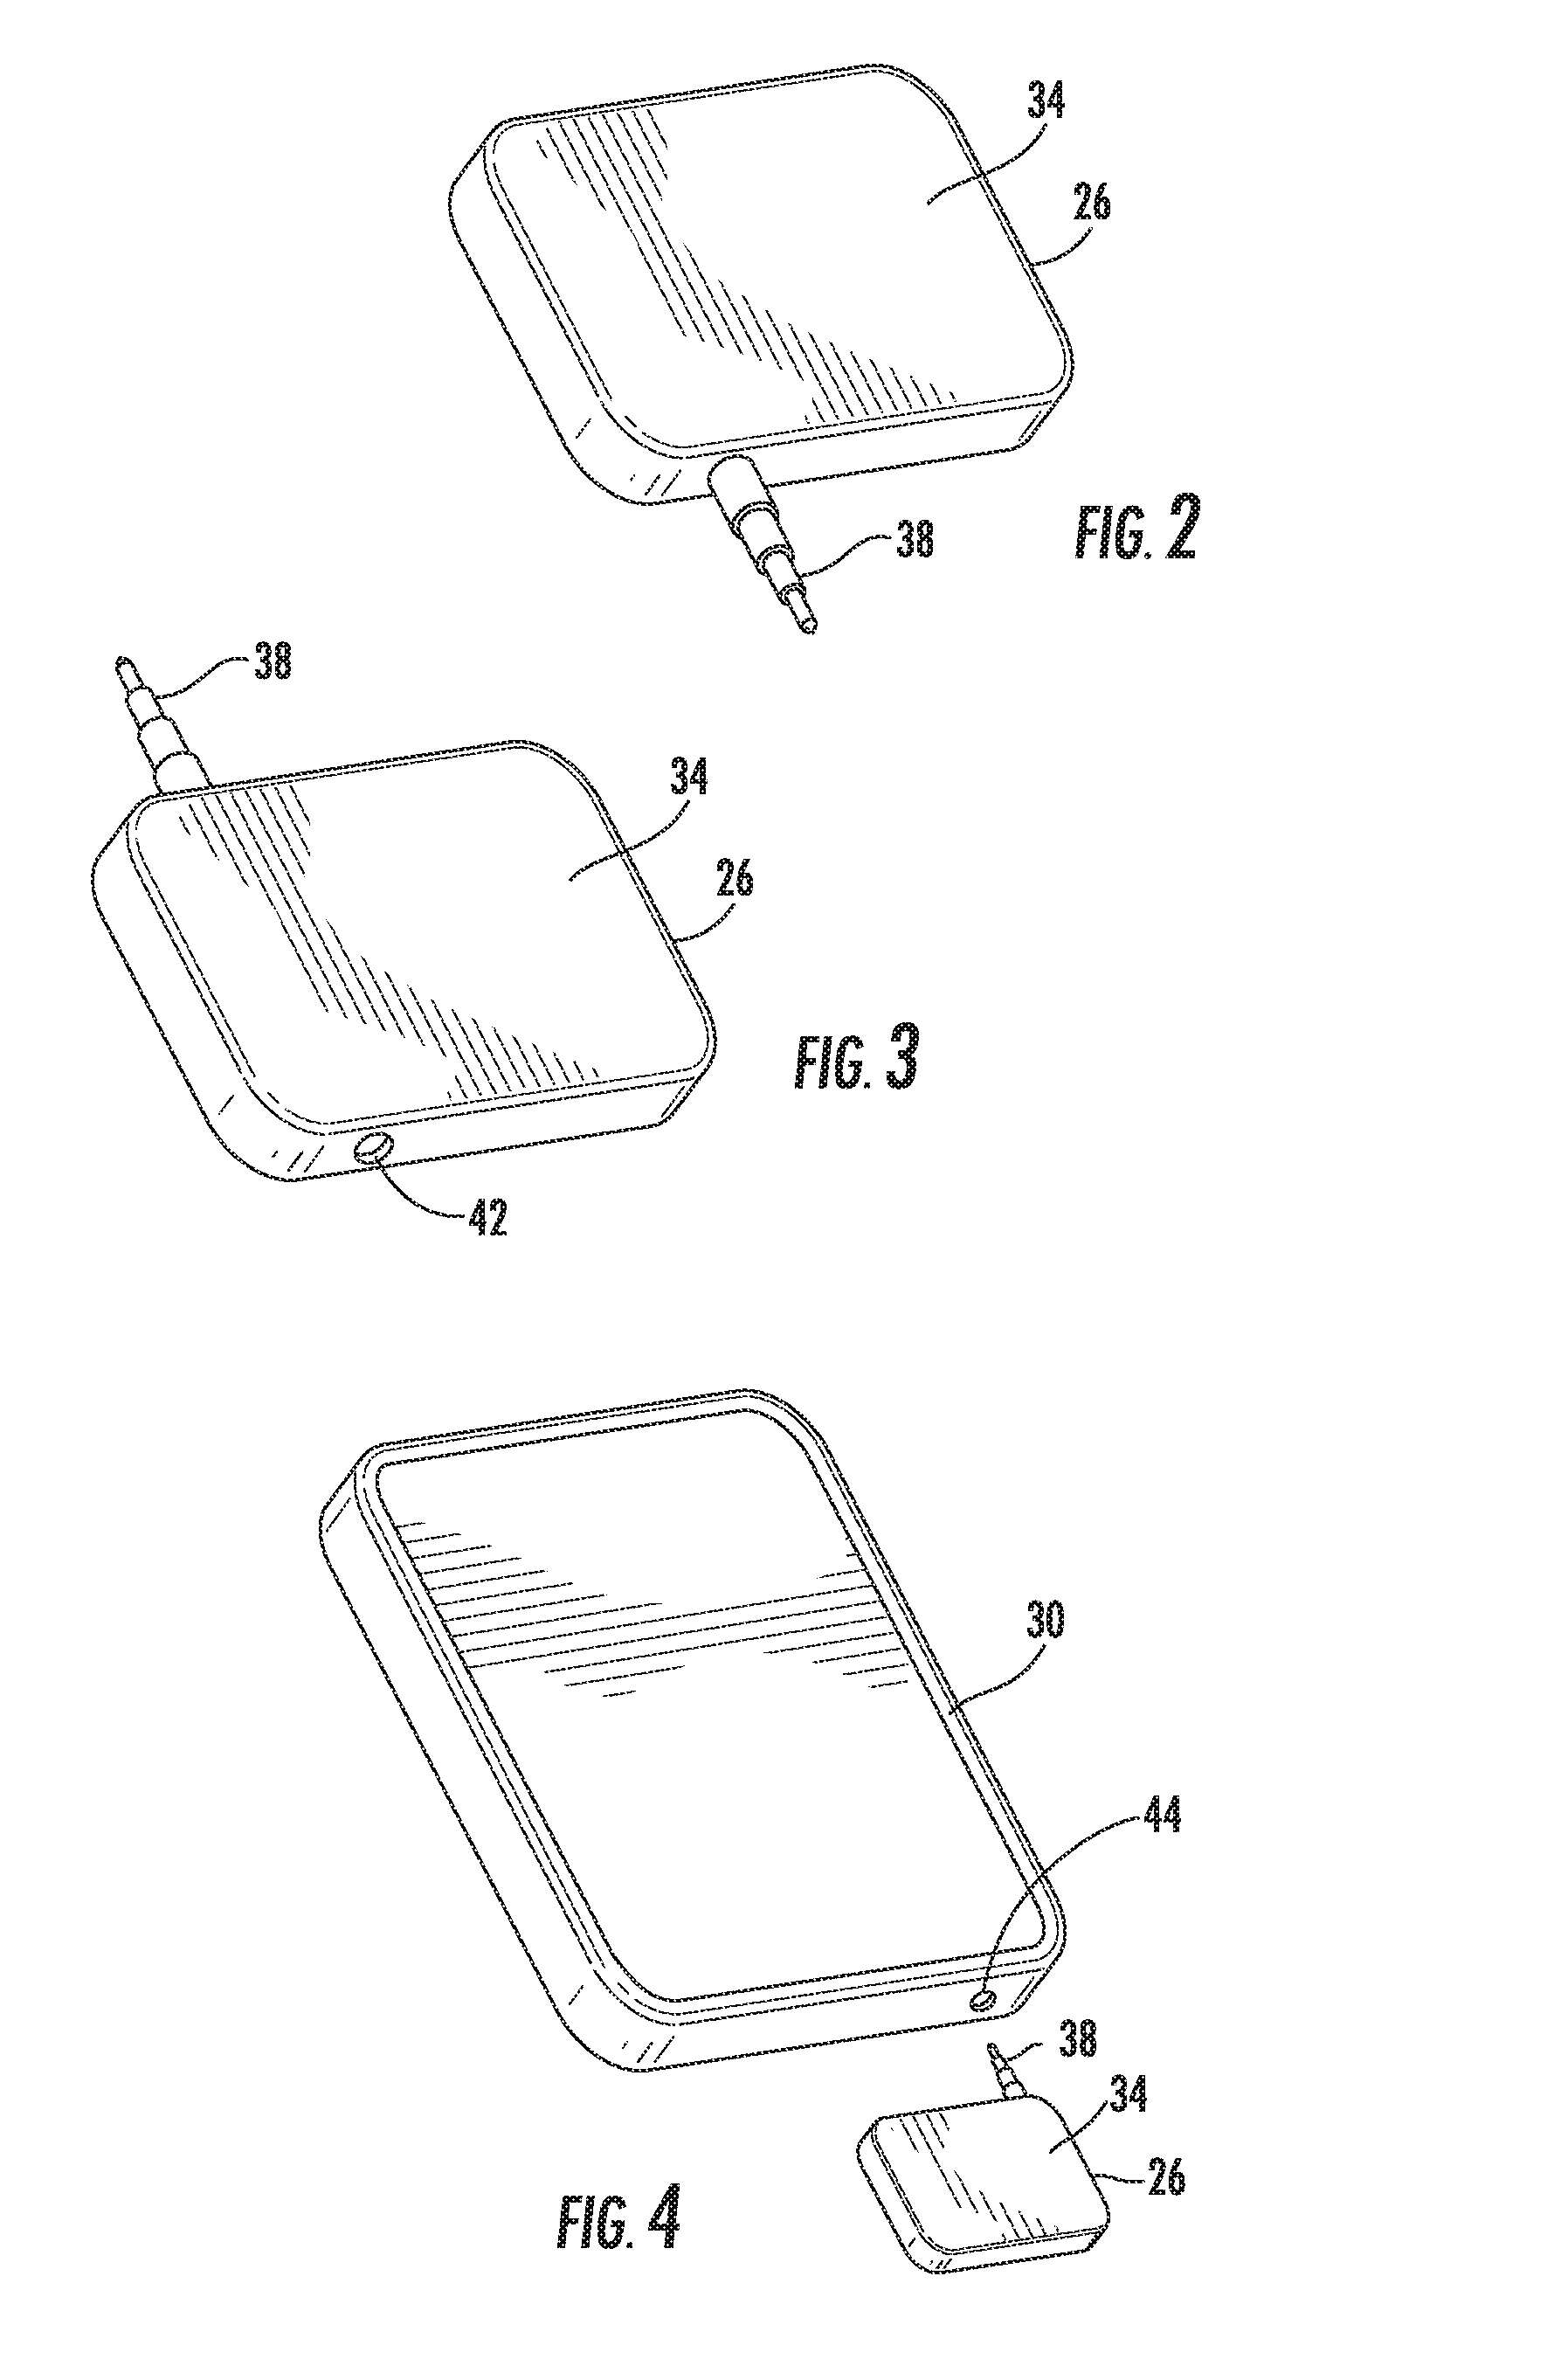 Heart rate monitor device and system